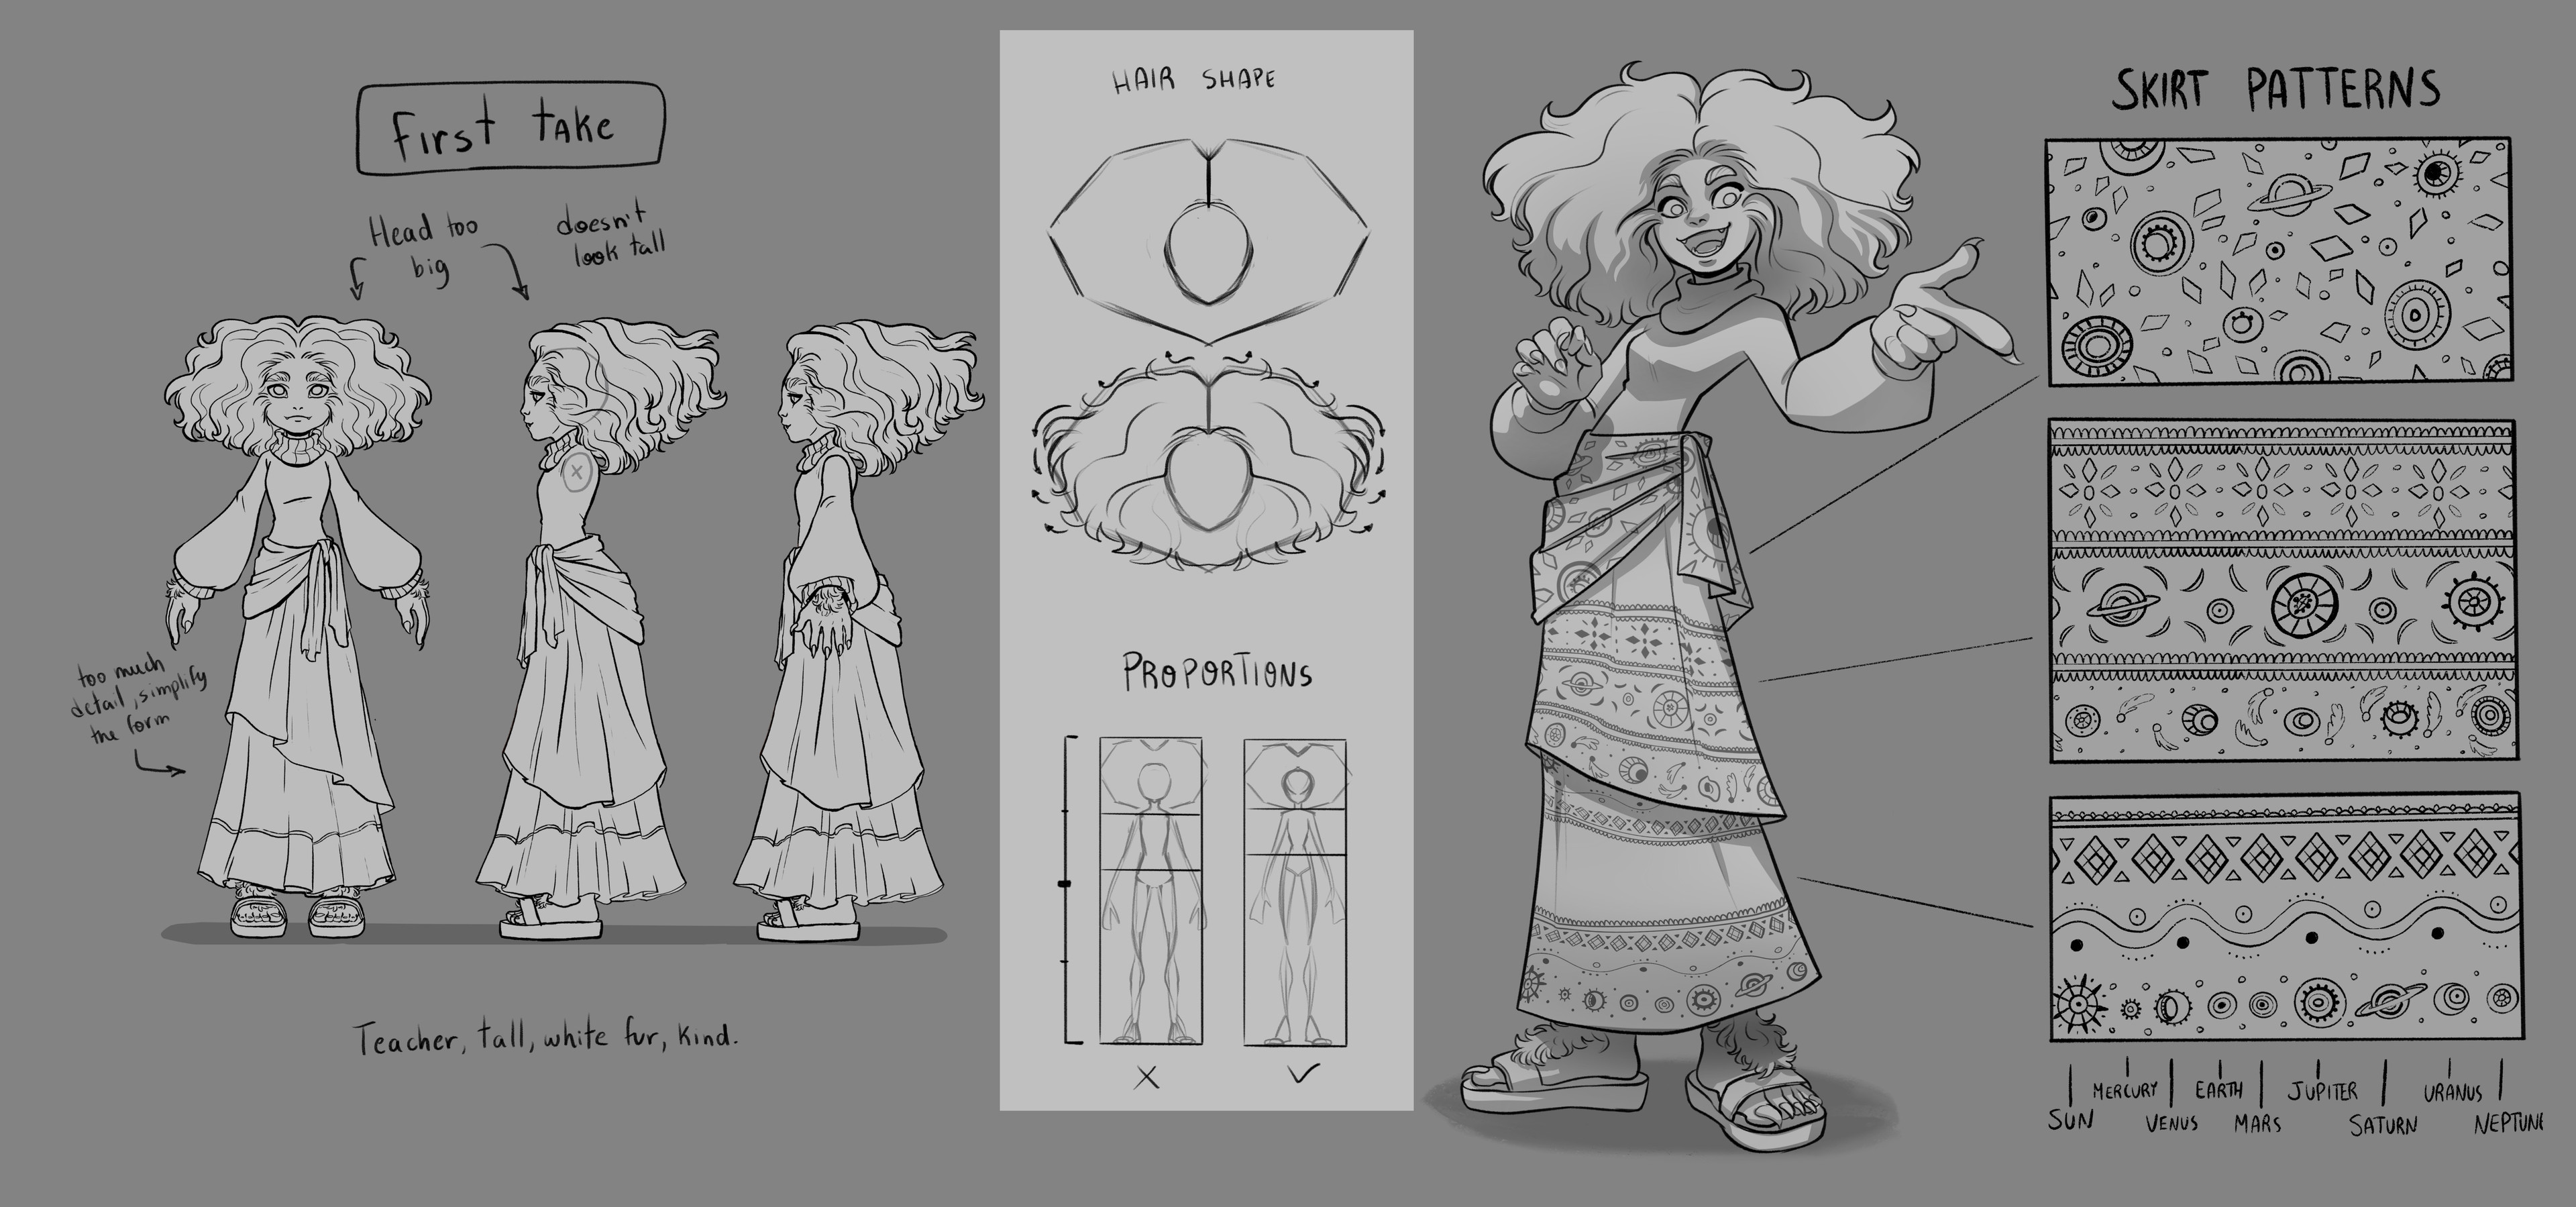 After making the character sheet I found that she was too complicated and would be a difficult character to animate, so I decided to simplify her shapes a bit more.